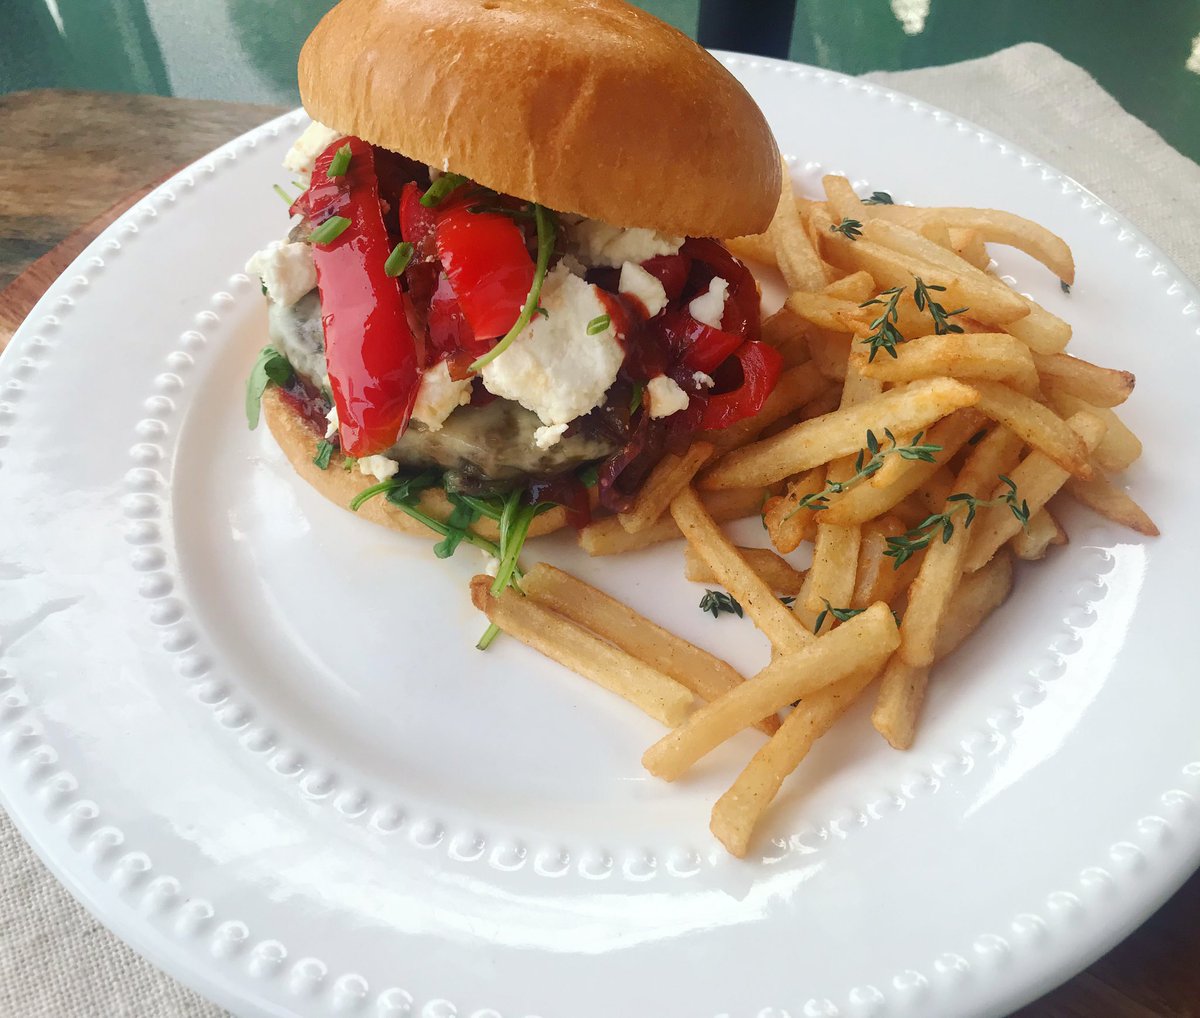 The Pepper 🌶️ Feta Burger 😋🌿sautéed red peppers 🌶️ red onions , melted pepper Jack cheese ,topped with feta cheese on a toasted Brioche bun with arugula & sriracha sauce 😋